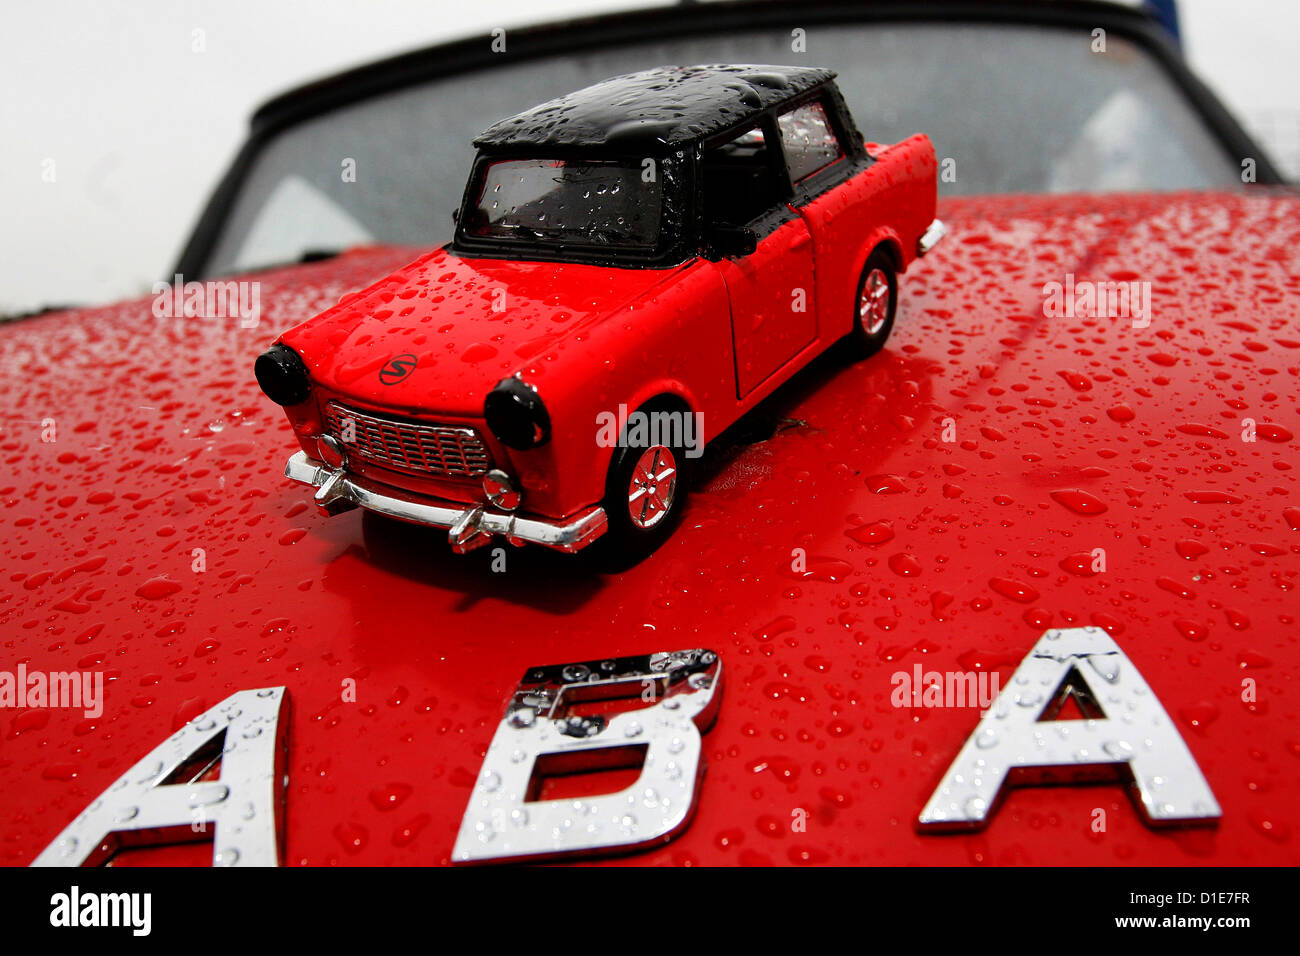 Red Trabant car model on the hood of the vehicle Stock Photo